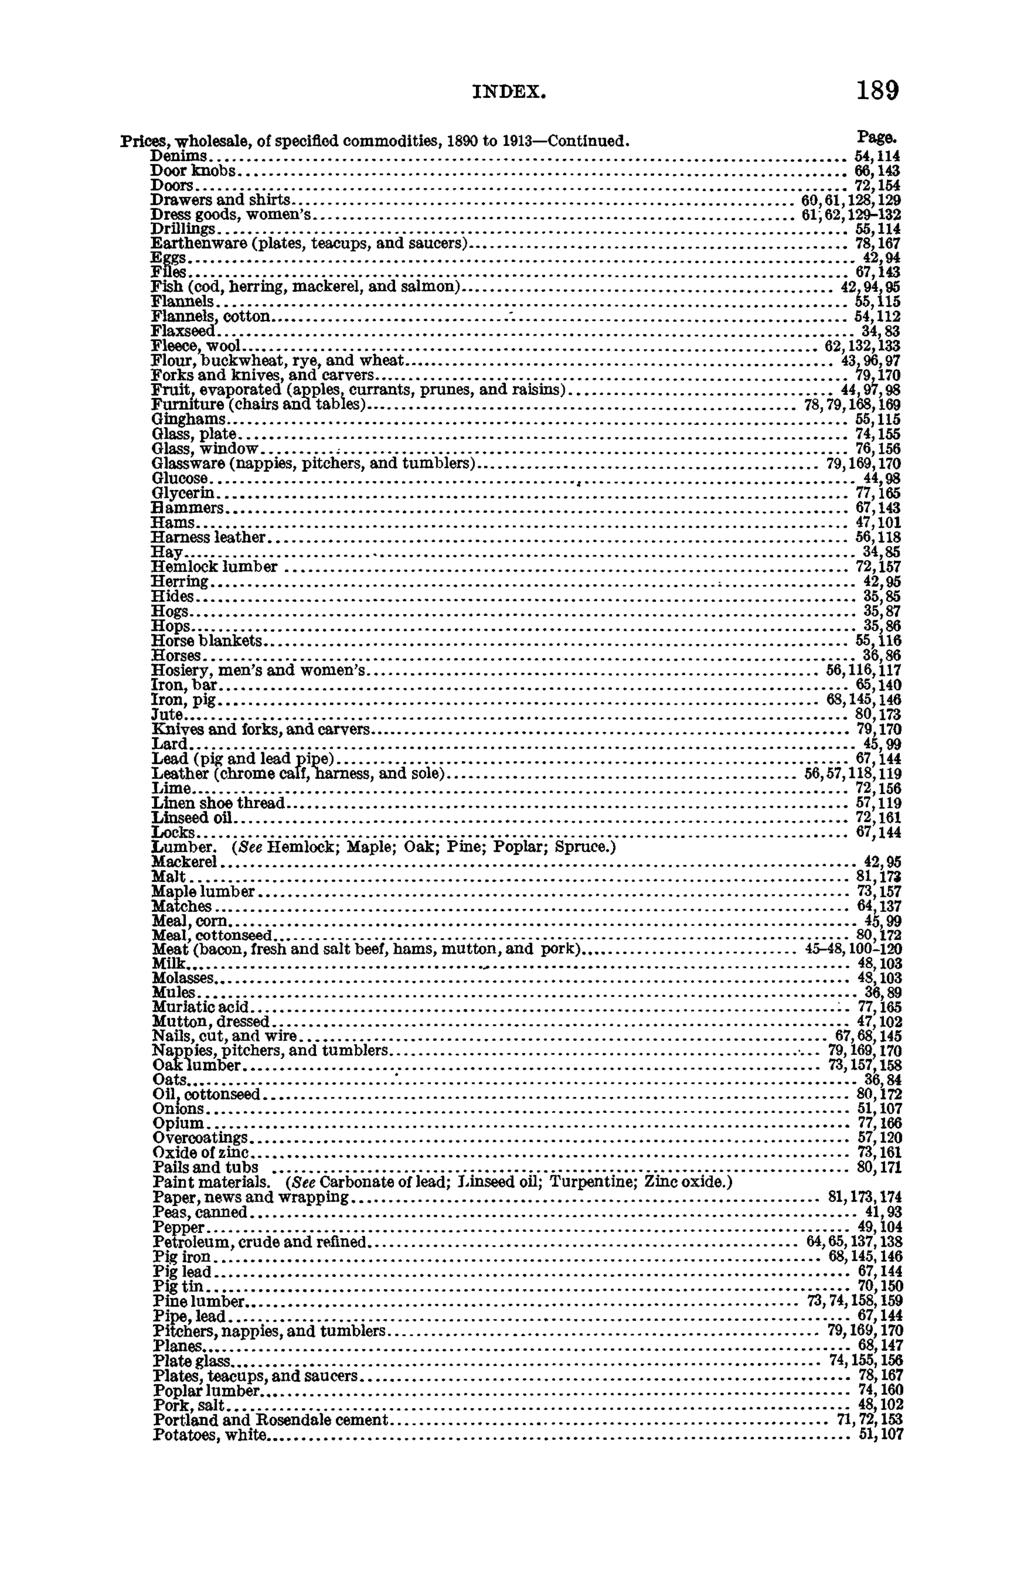 INDEX, 1 8 9 Prices, wholesale, of specified commodities, 1890 to 1913 Continued. Denim s... D oorknob s... Doors... Drawers and shirts... Dress goods, women s... Drillings.